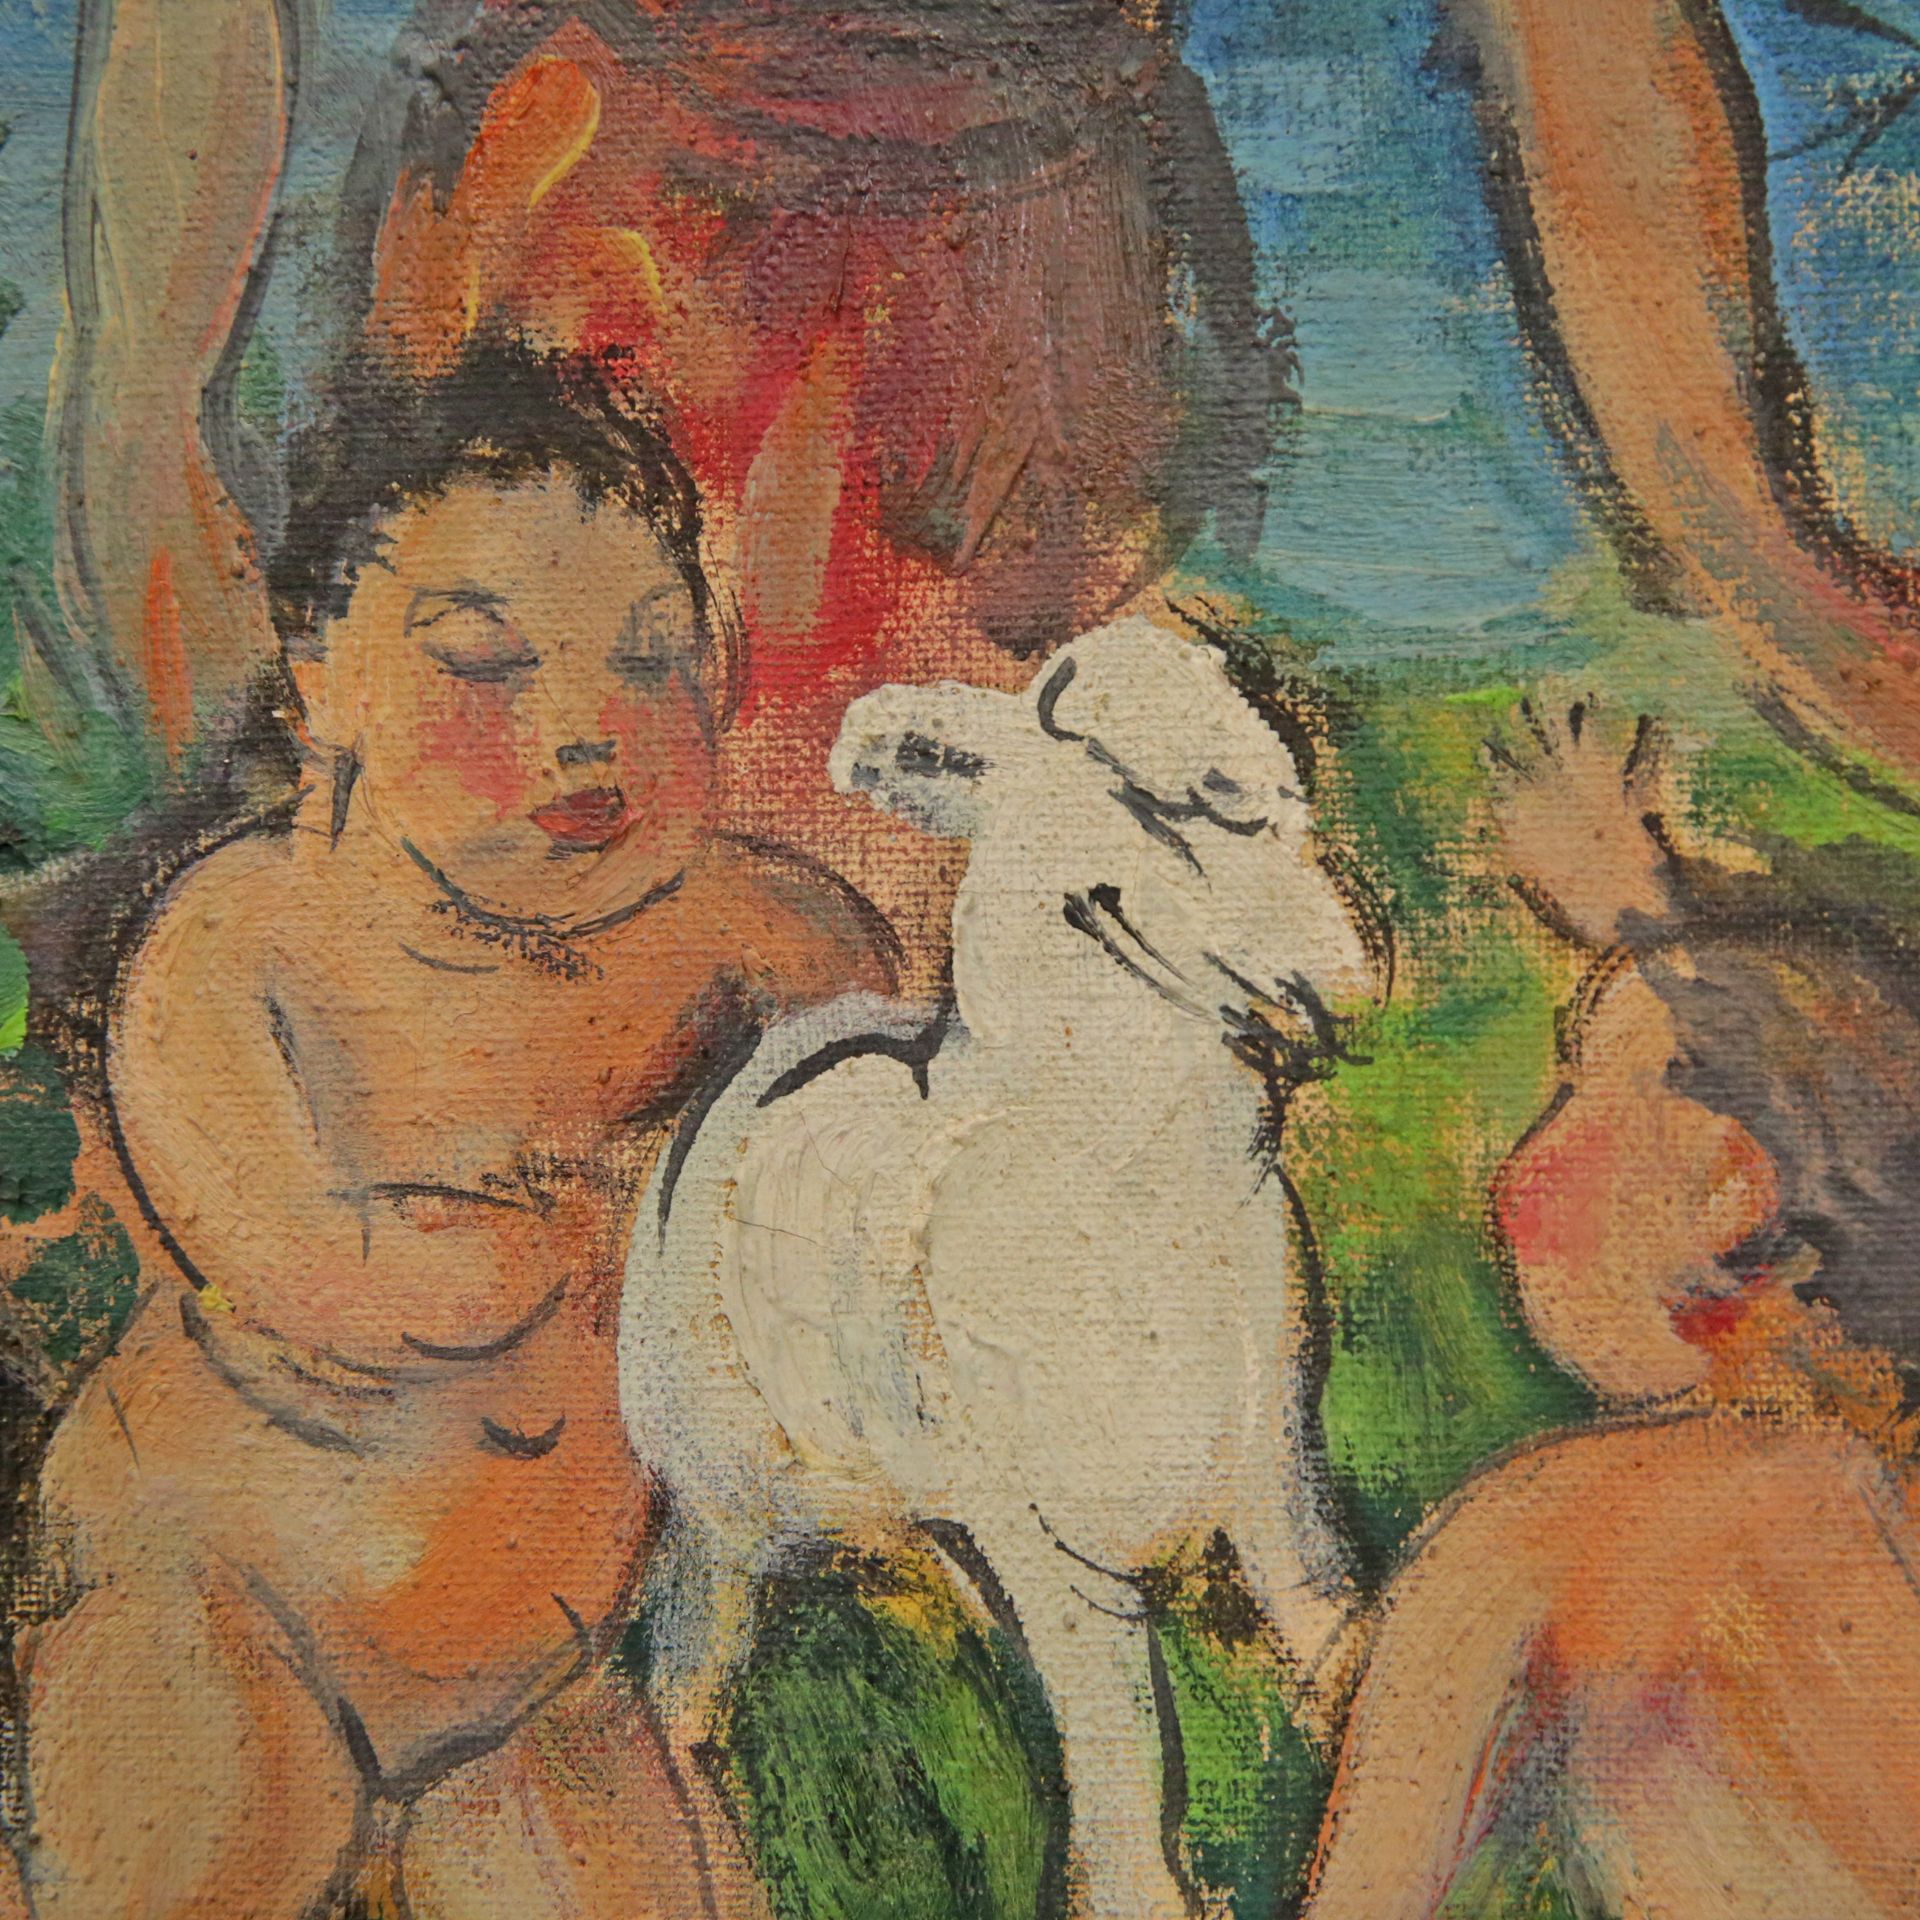 Al Jourdain (1920-?) "Bacchanalia", oil on canvas, 20th century French painting. - Image 2 of 4